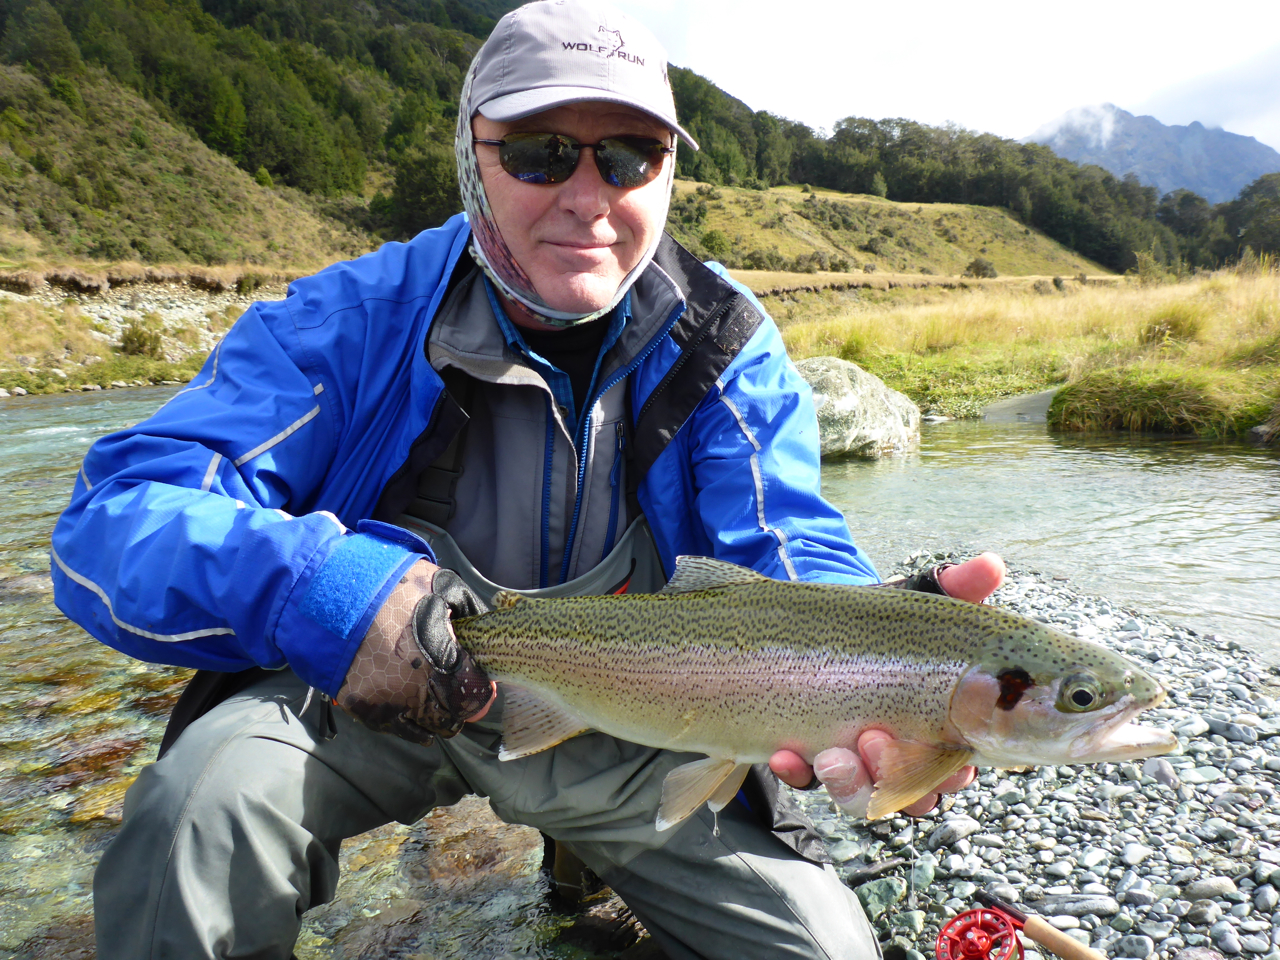 Chris with a healthy rainbow  during a fun day in the wilderness!